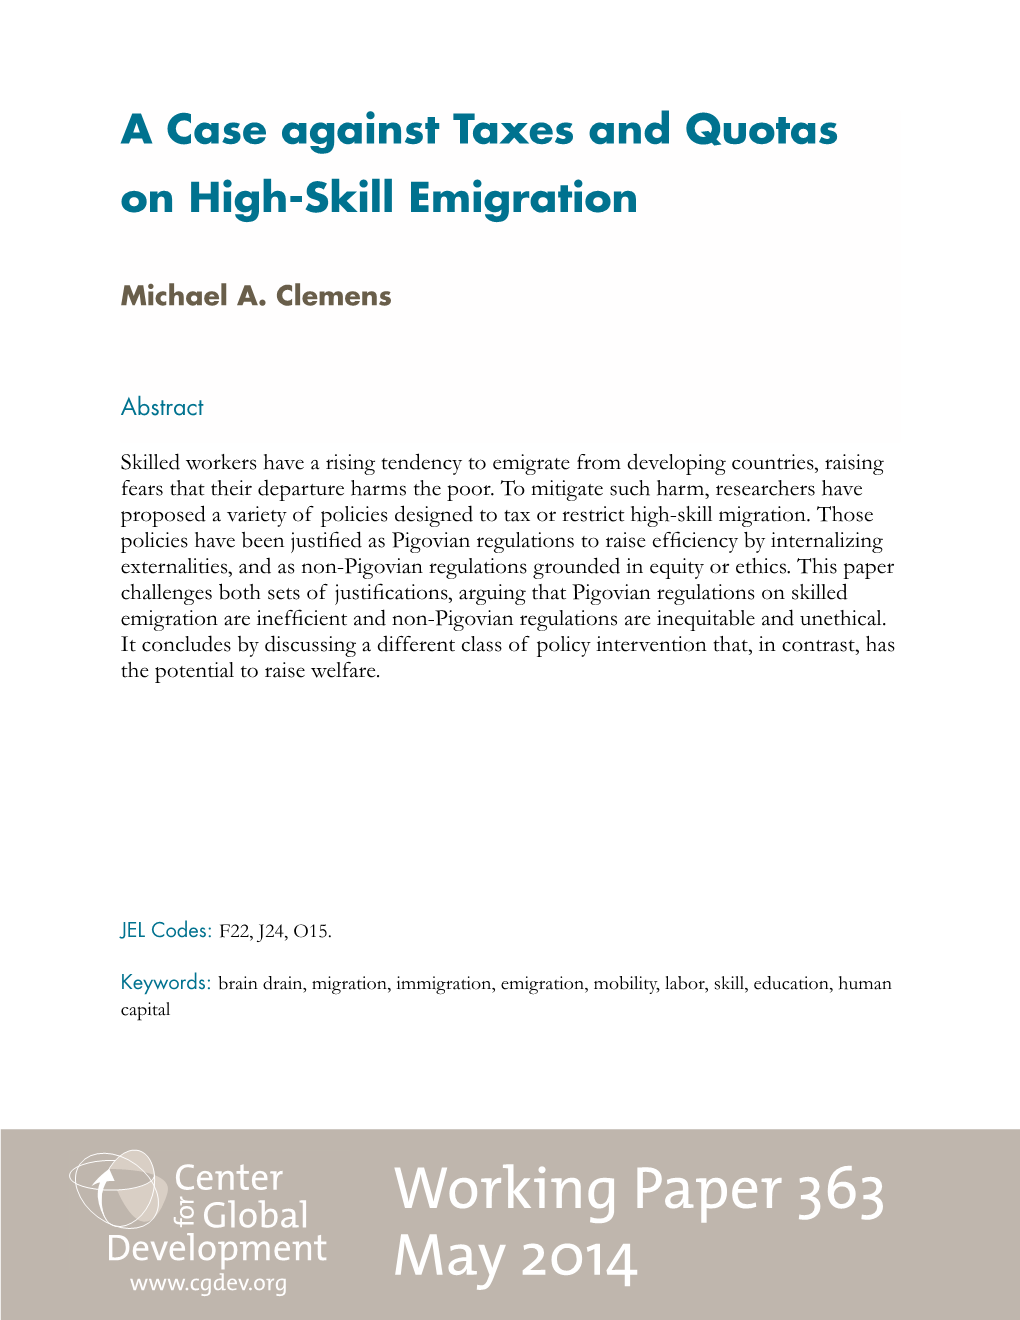 A Case Against Taxes and Quotas on High-Skill Emigration